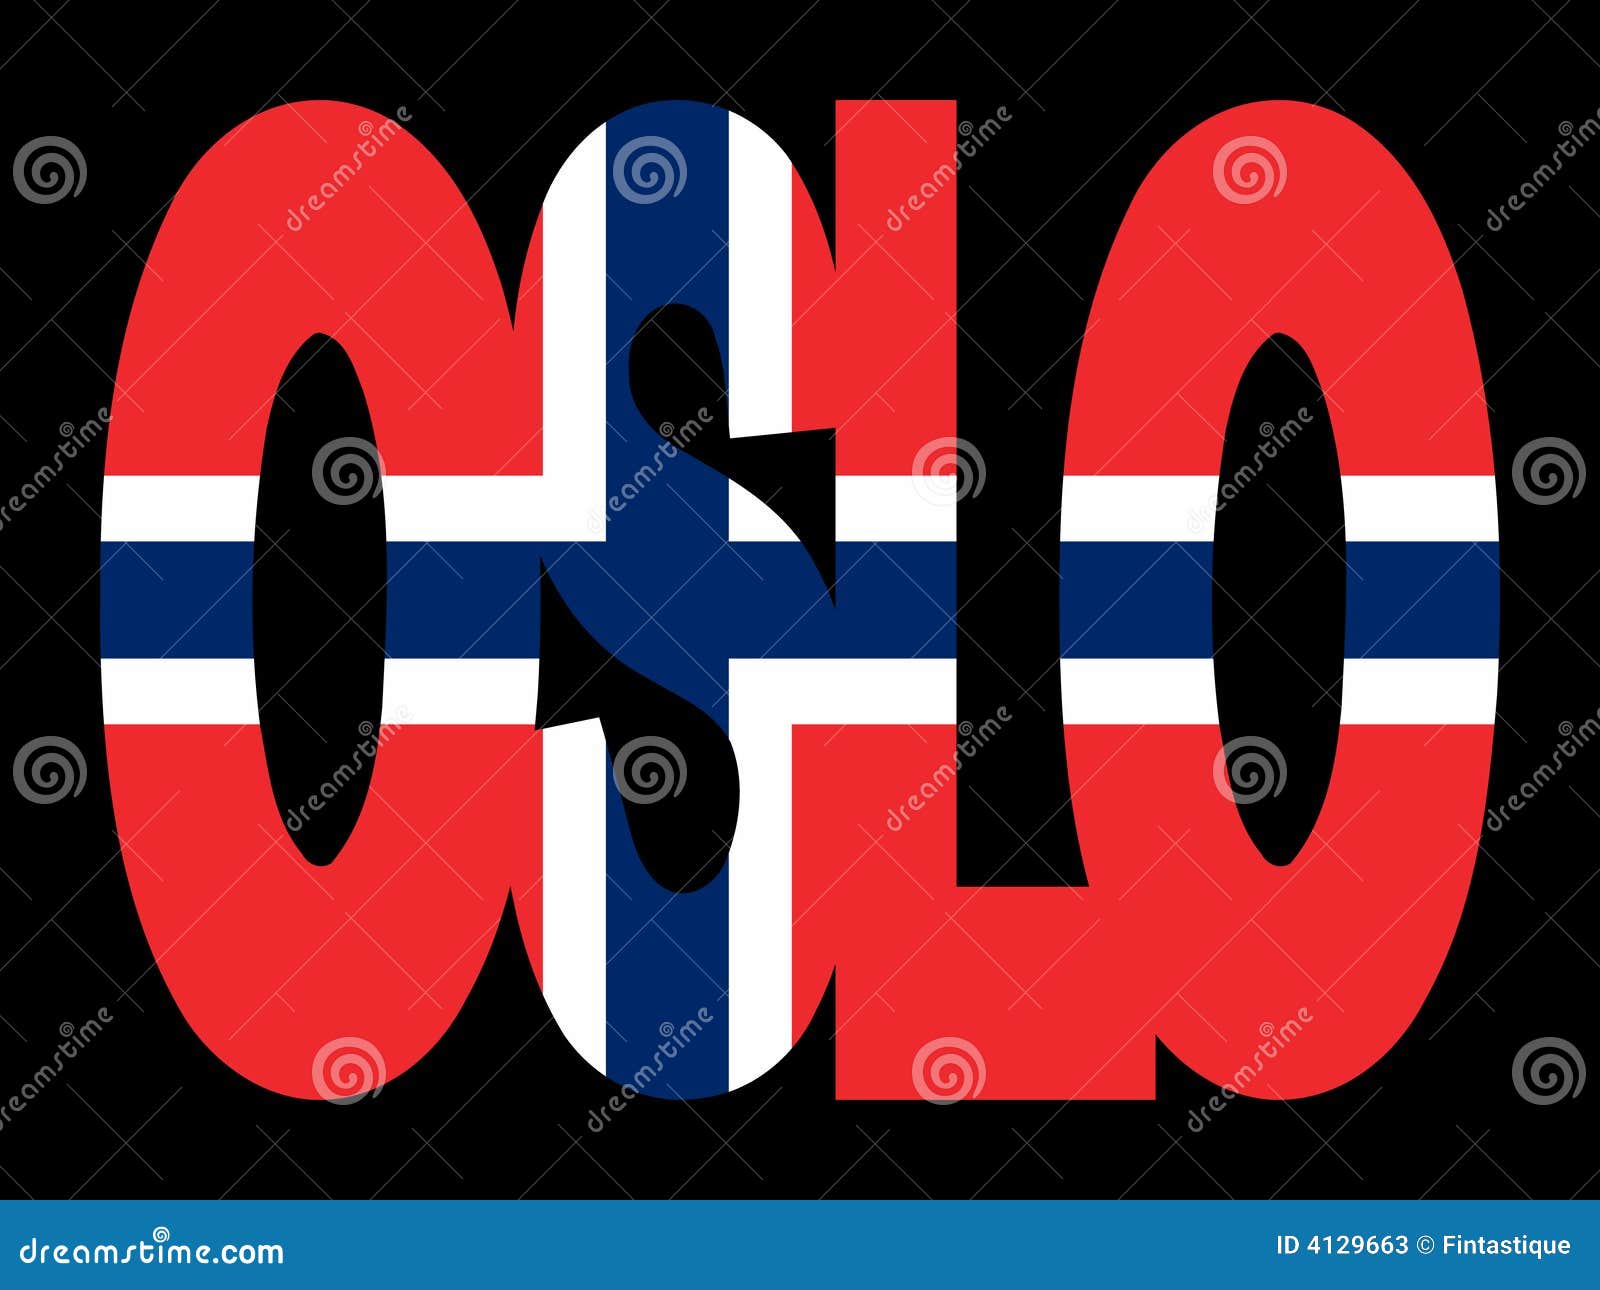 Oslo text with flag stock vector. Illustration of city - 4129663